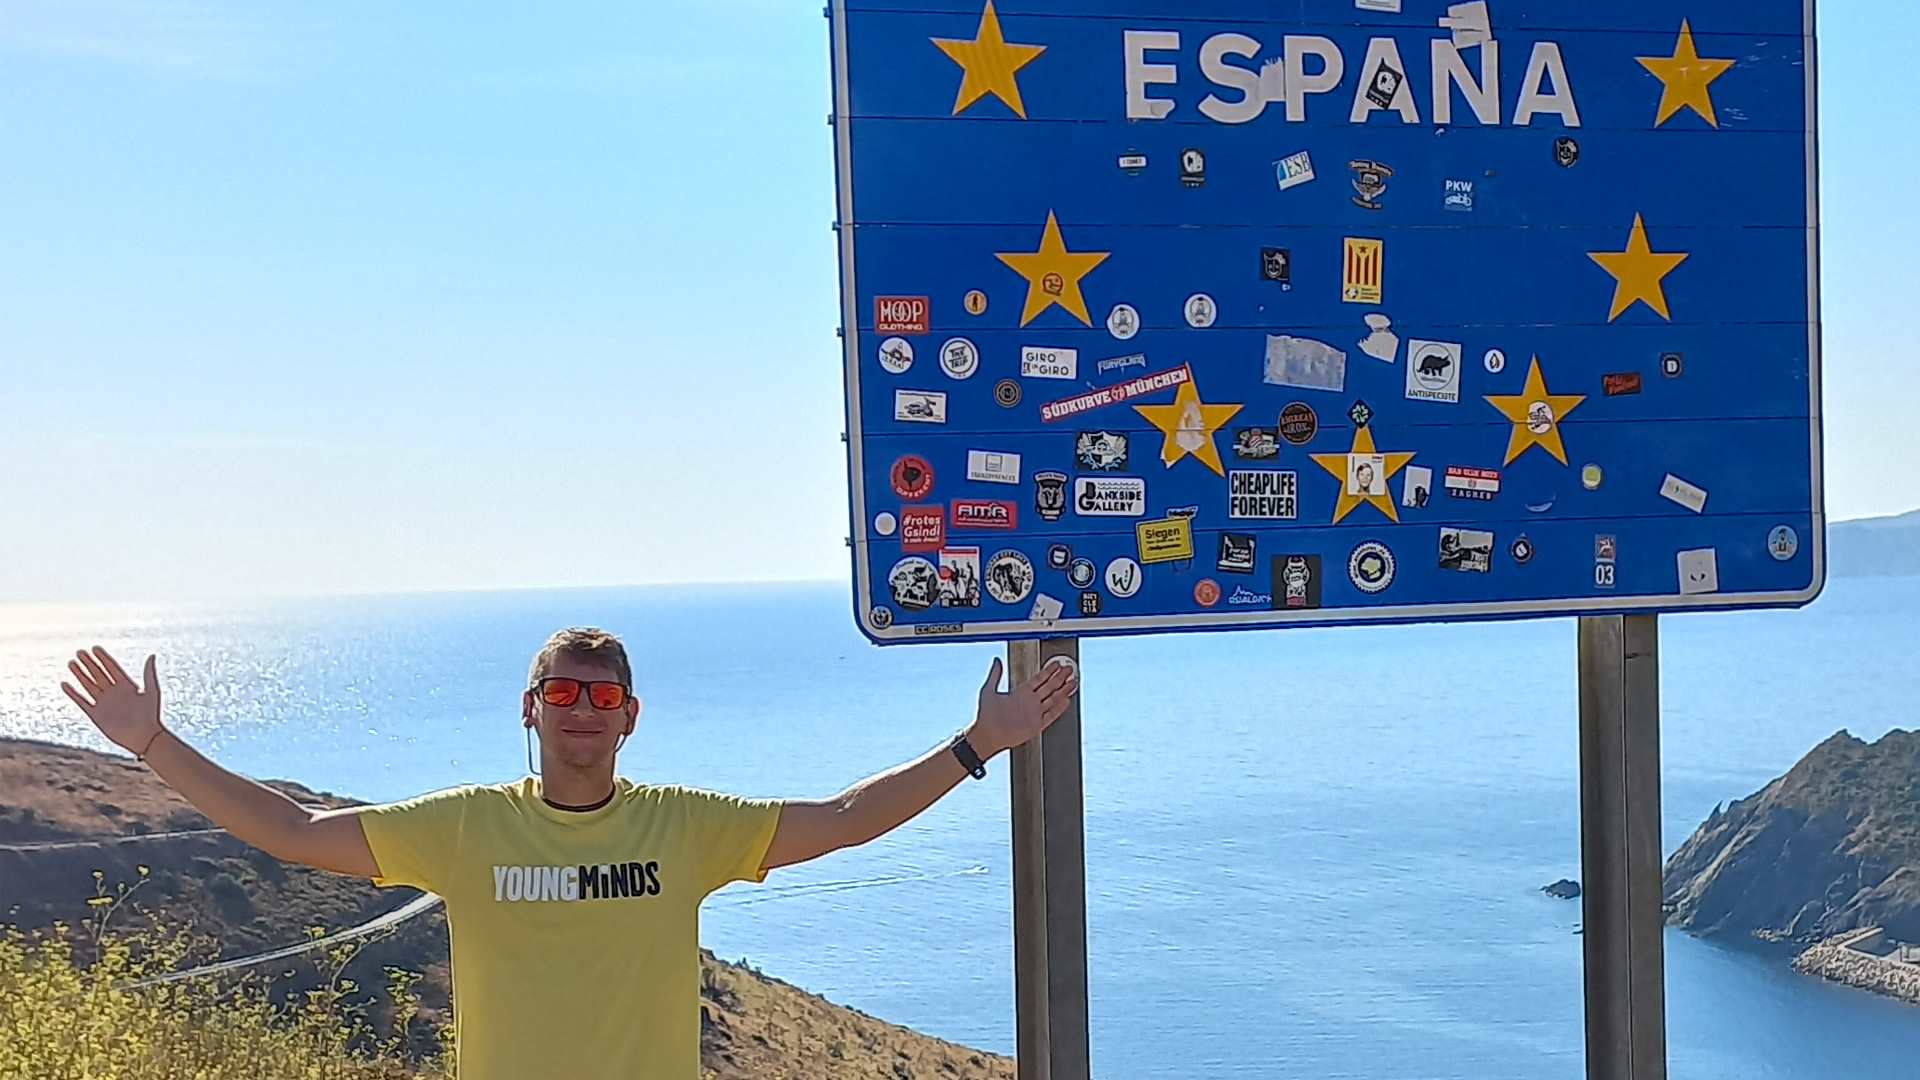 Our fundraiser, Michael Evans, standing on the mountainside in Spain next to a large sign reading: España.